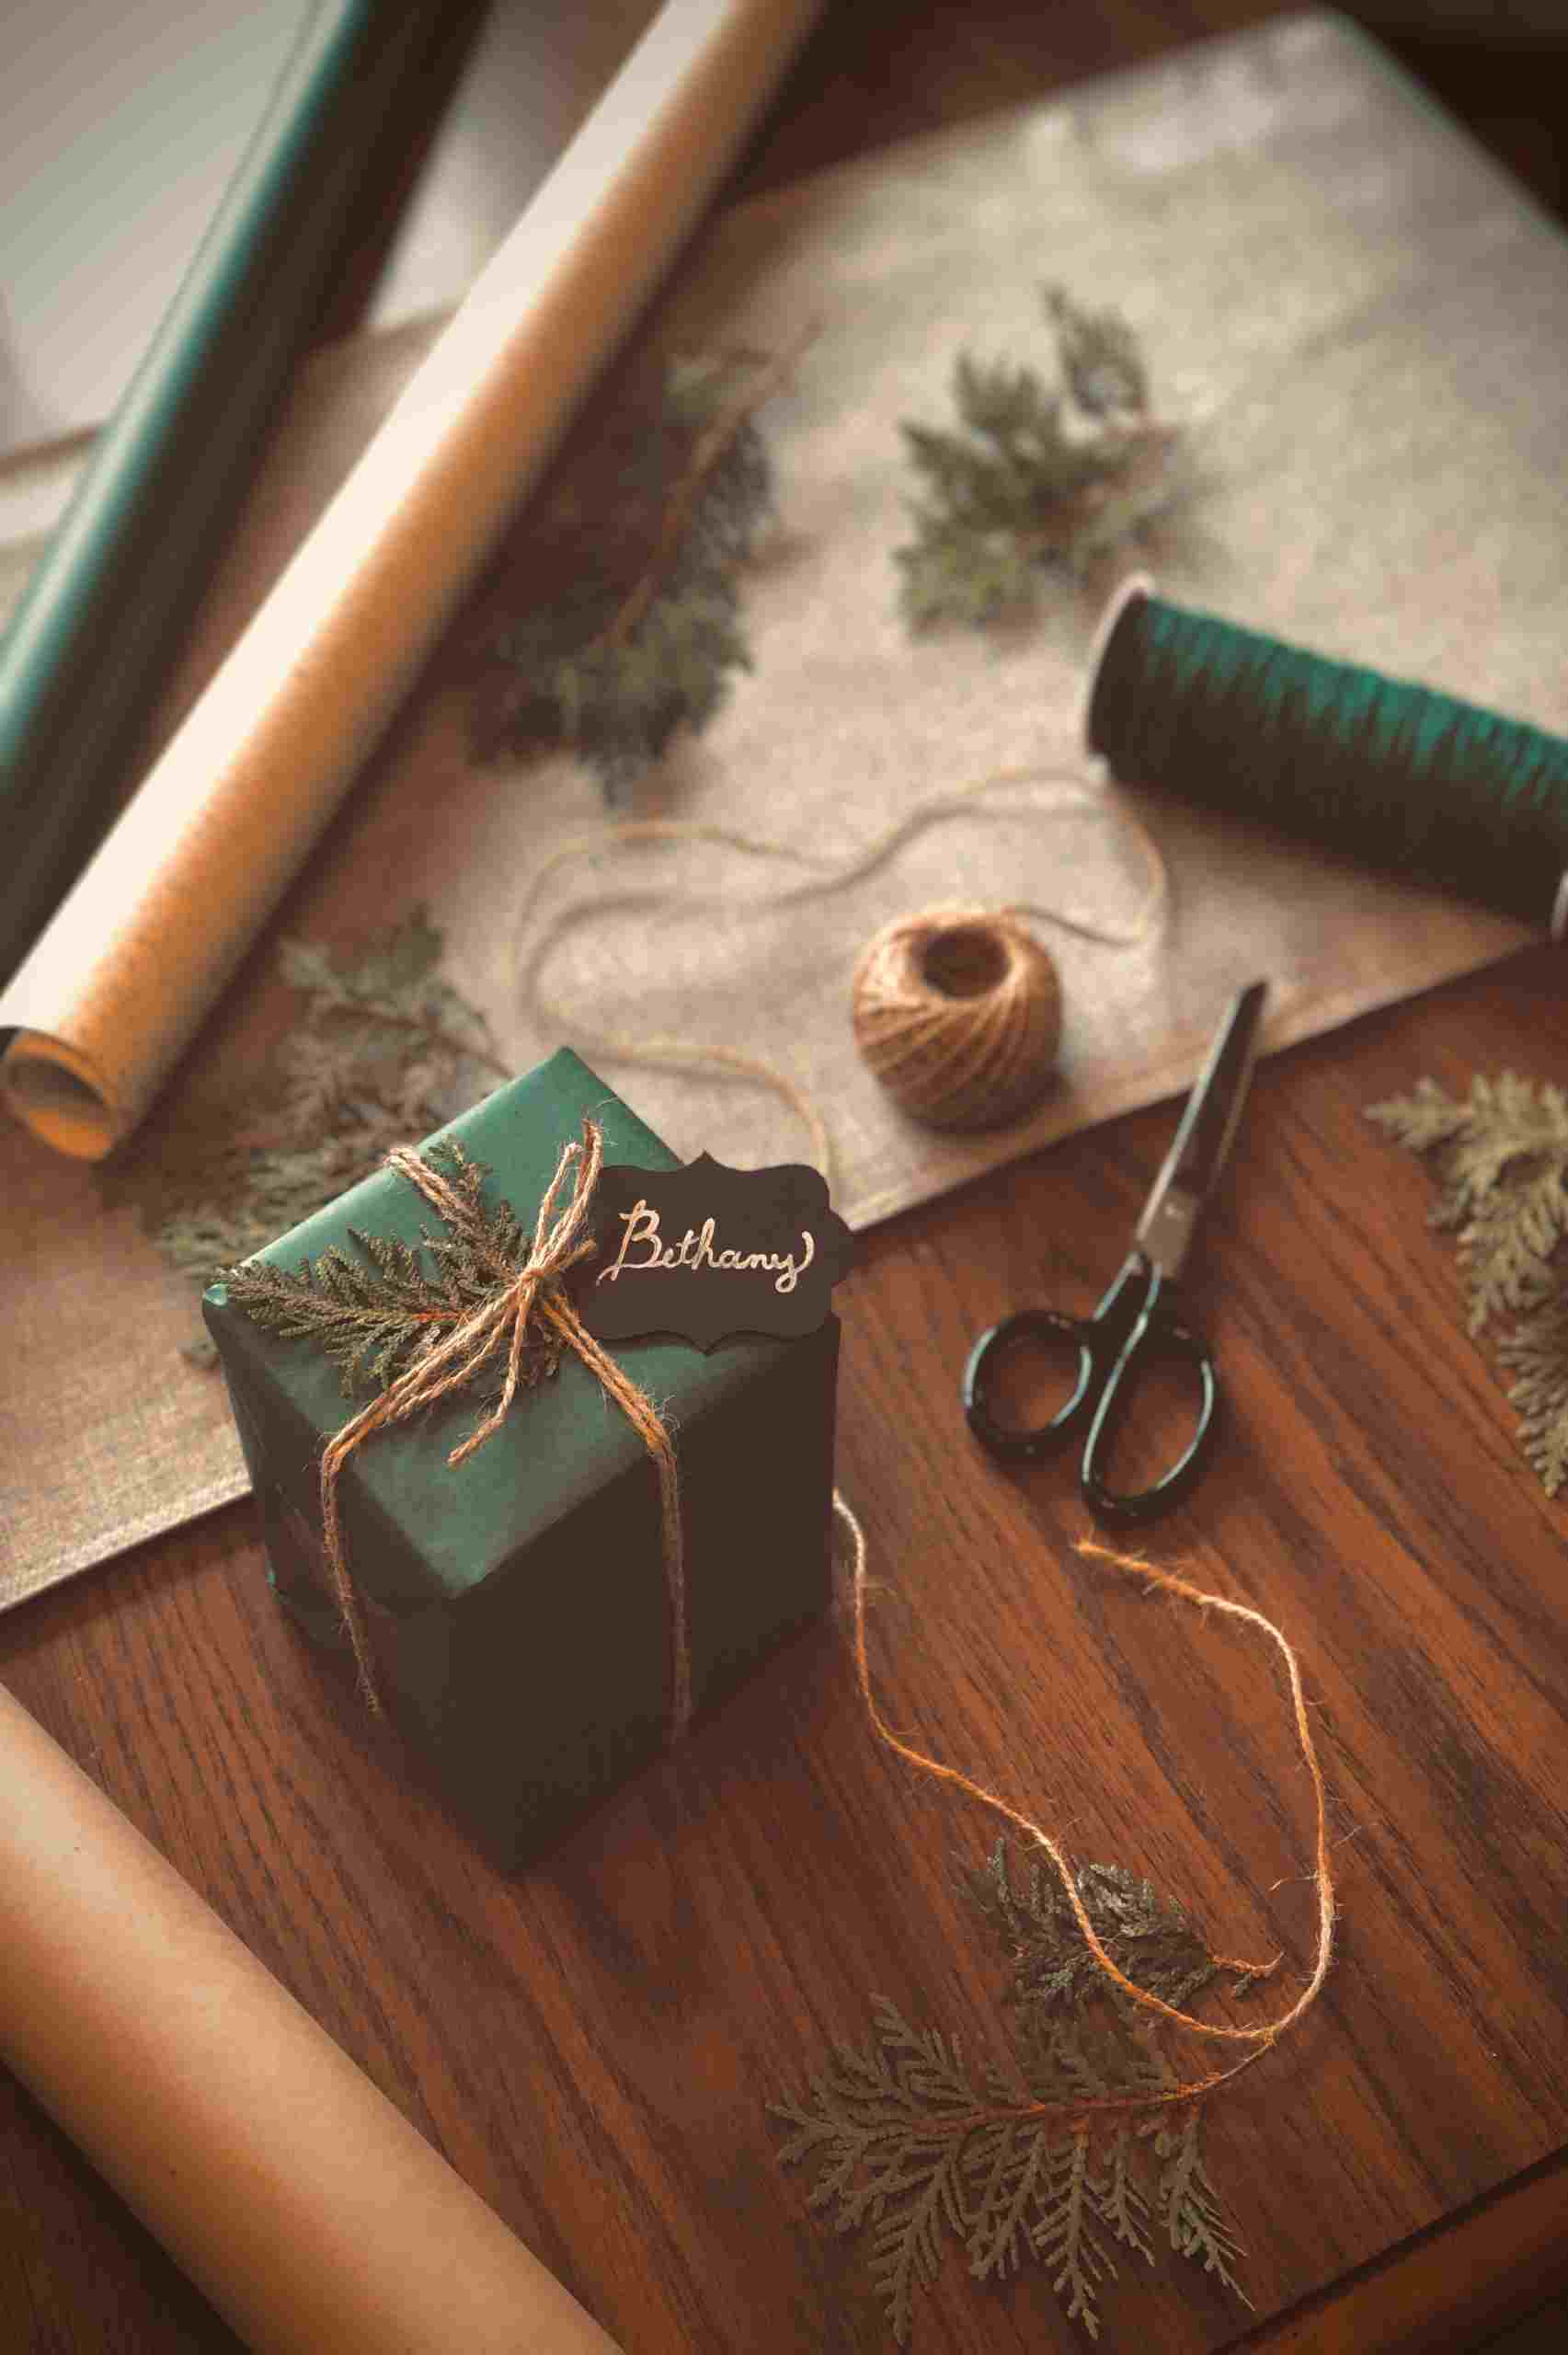 How to Master the Art of Gift Giving